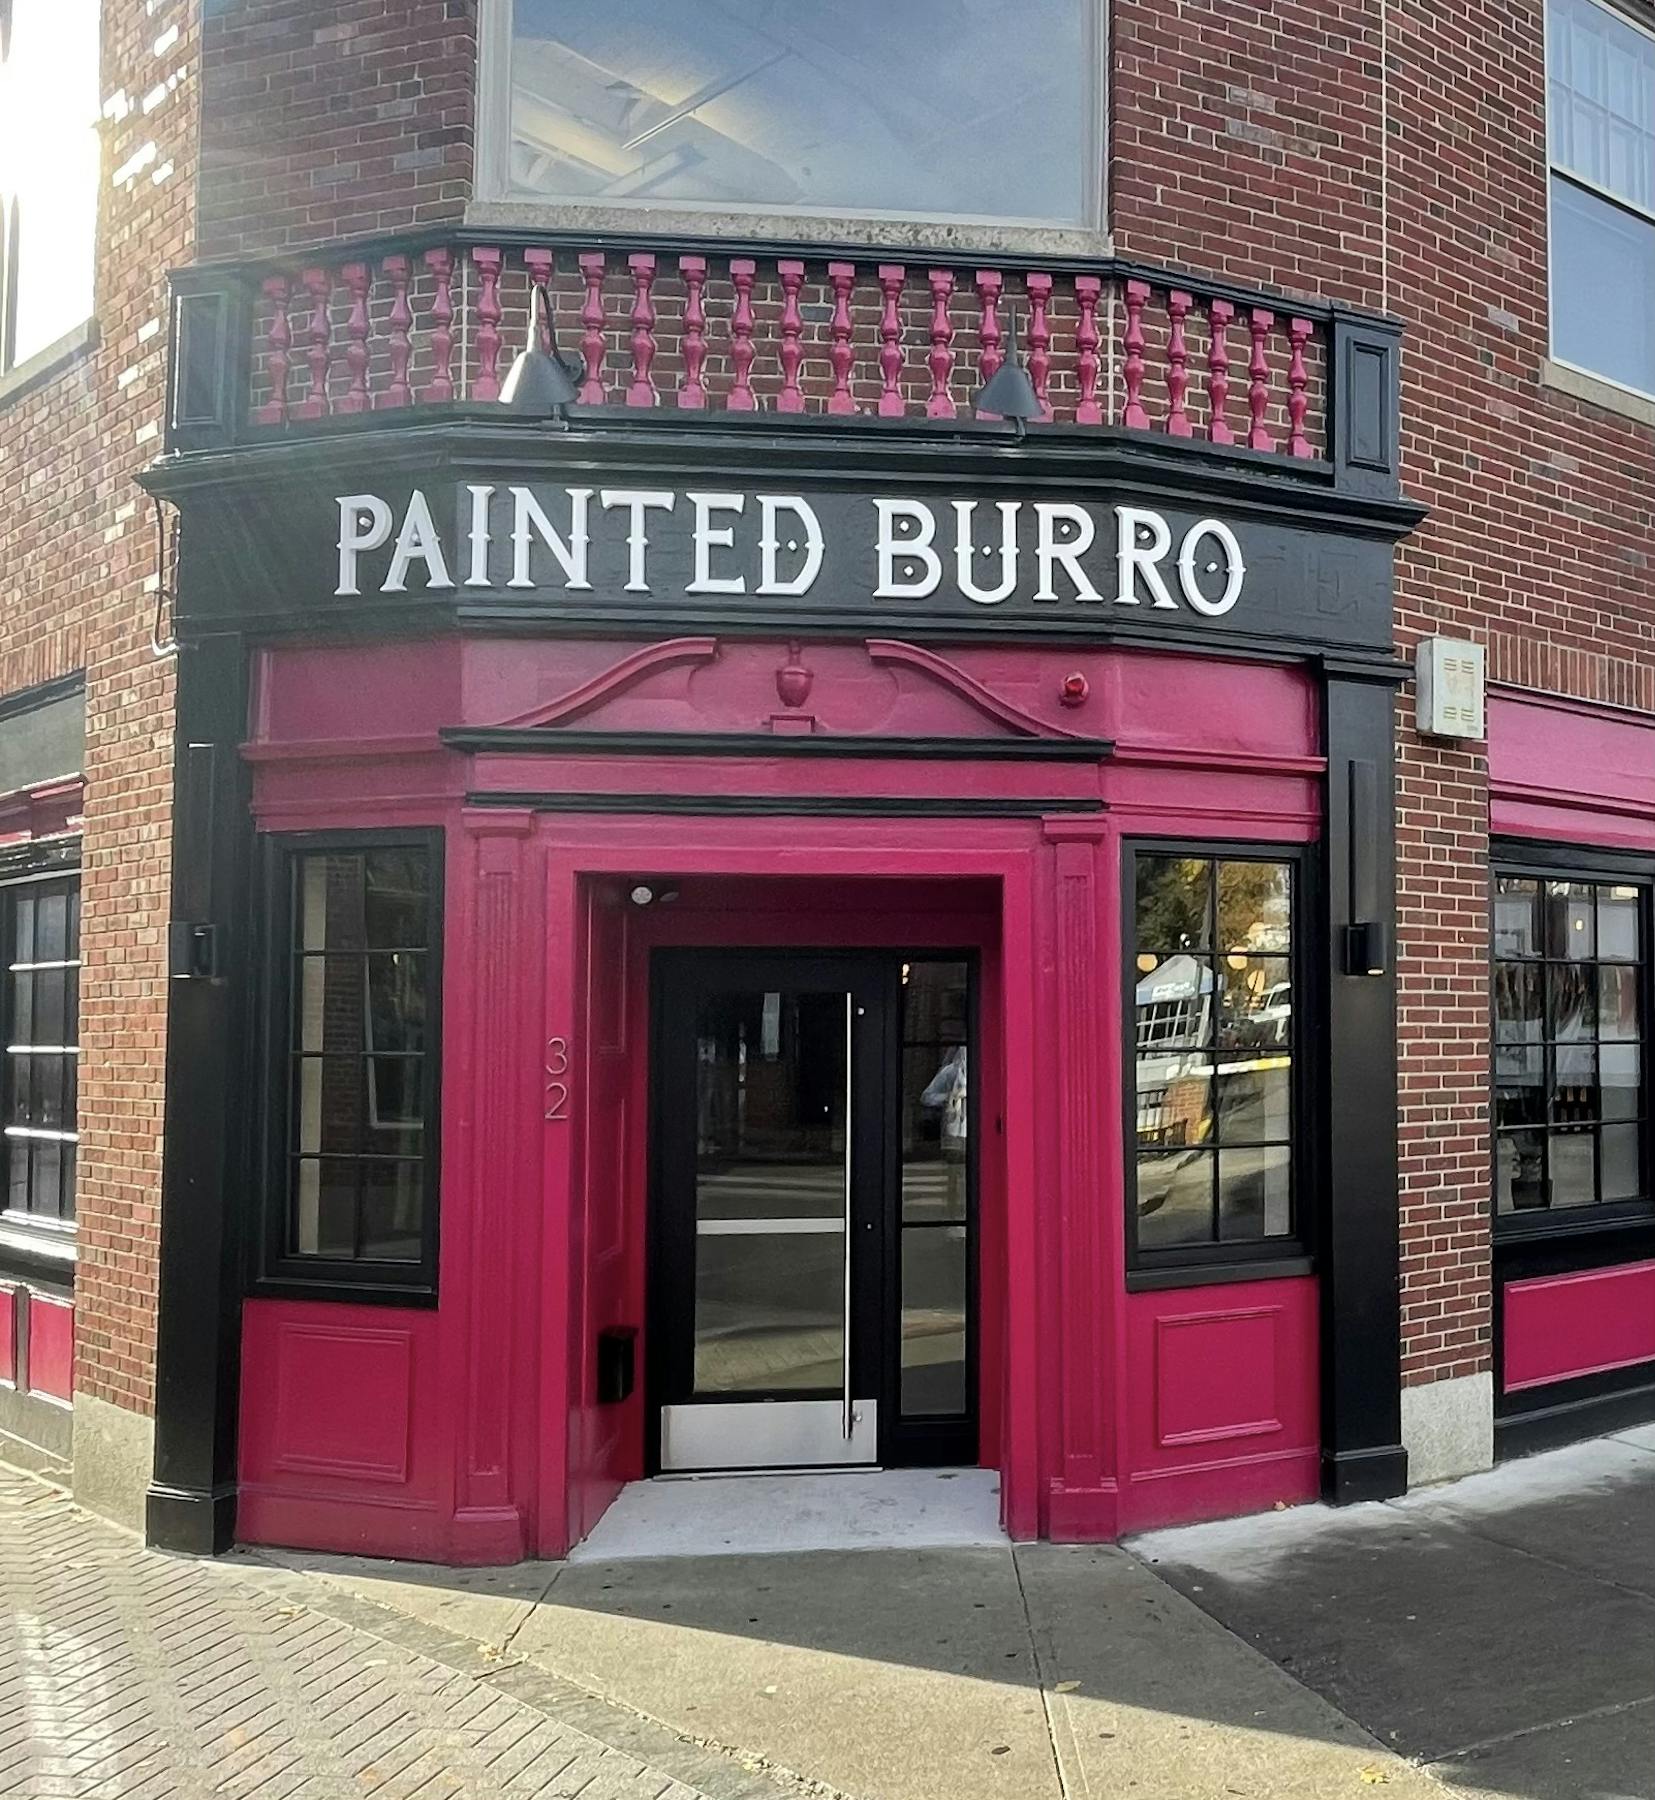 Harvard Square Gets Fired Up as The Painted Burro Delivers Sizzling